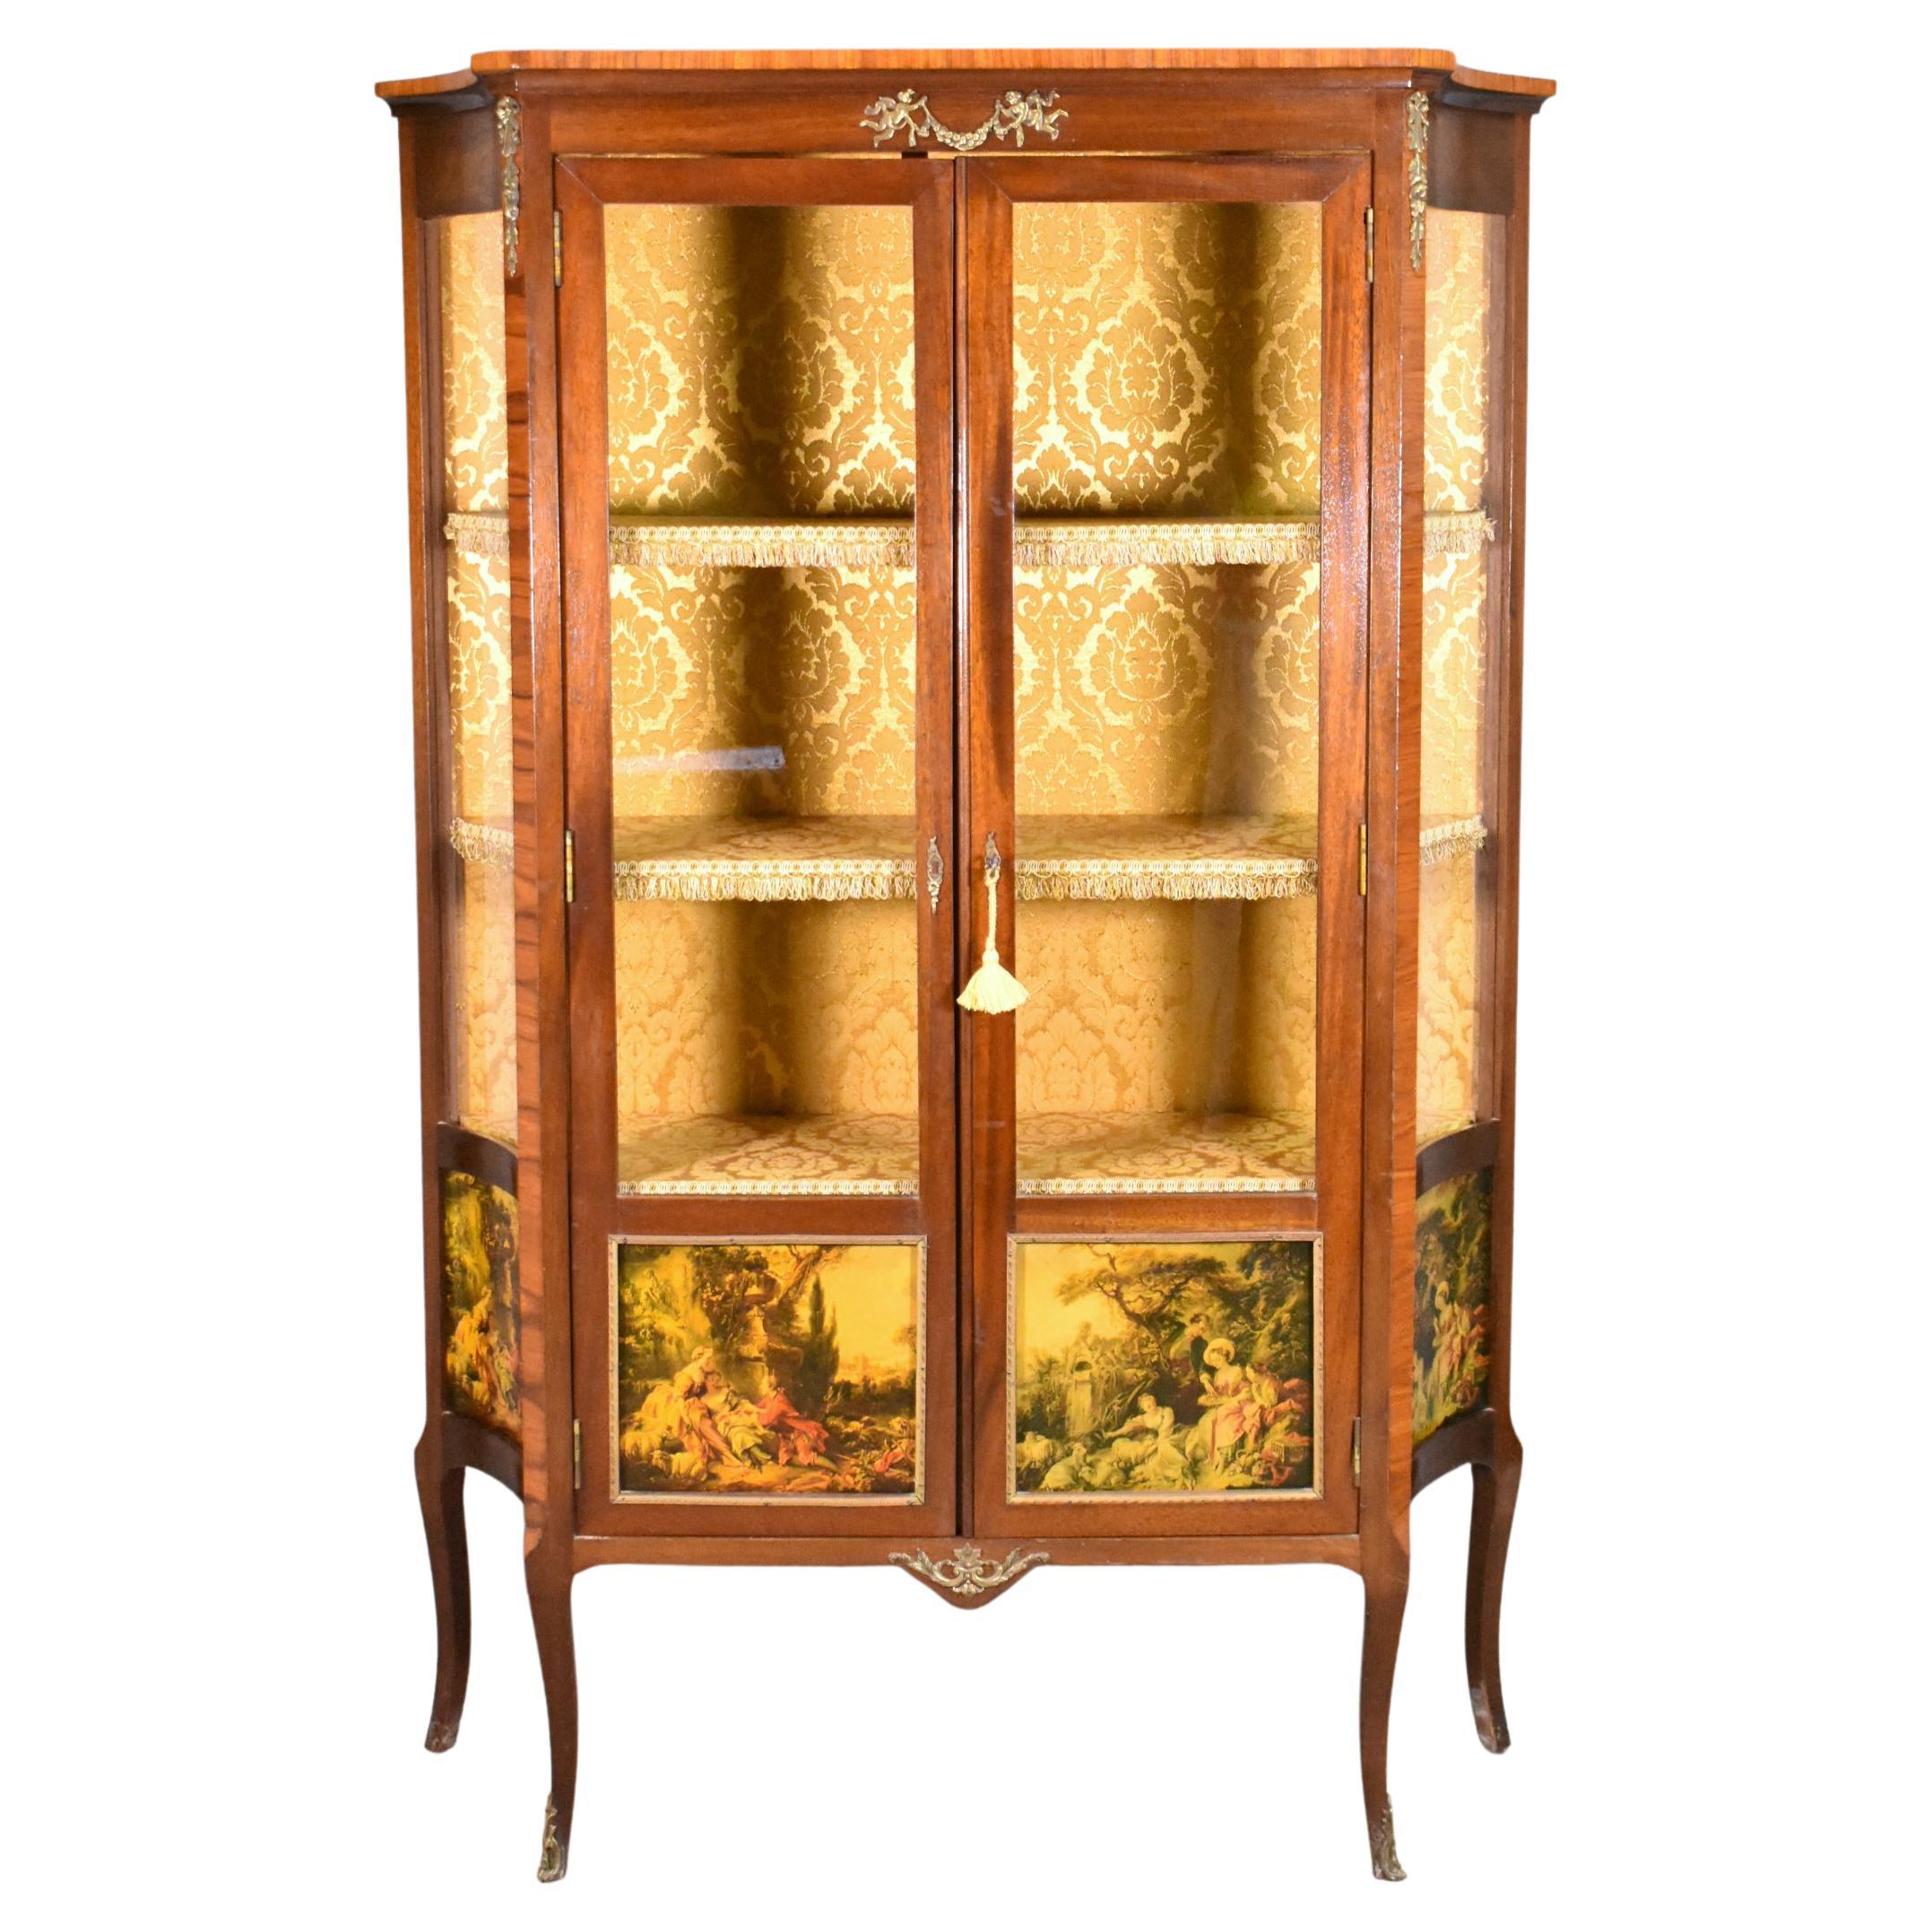 Damask Case Pieces and Storage Cabinets